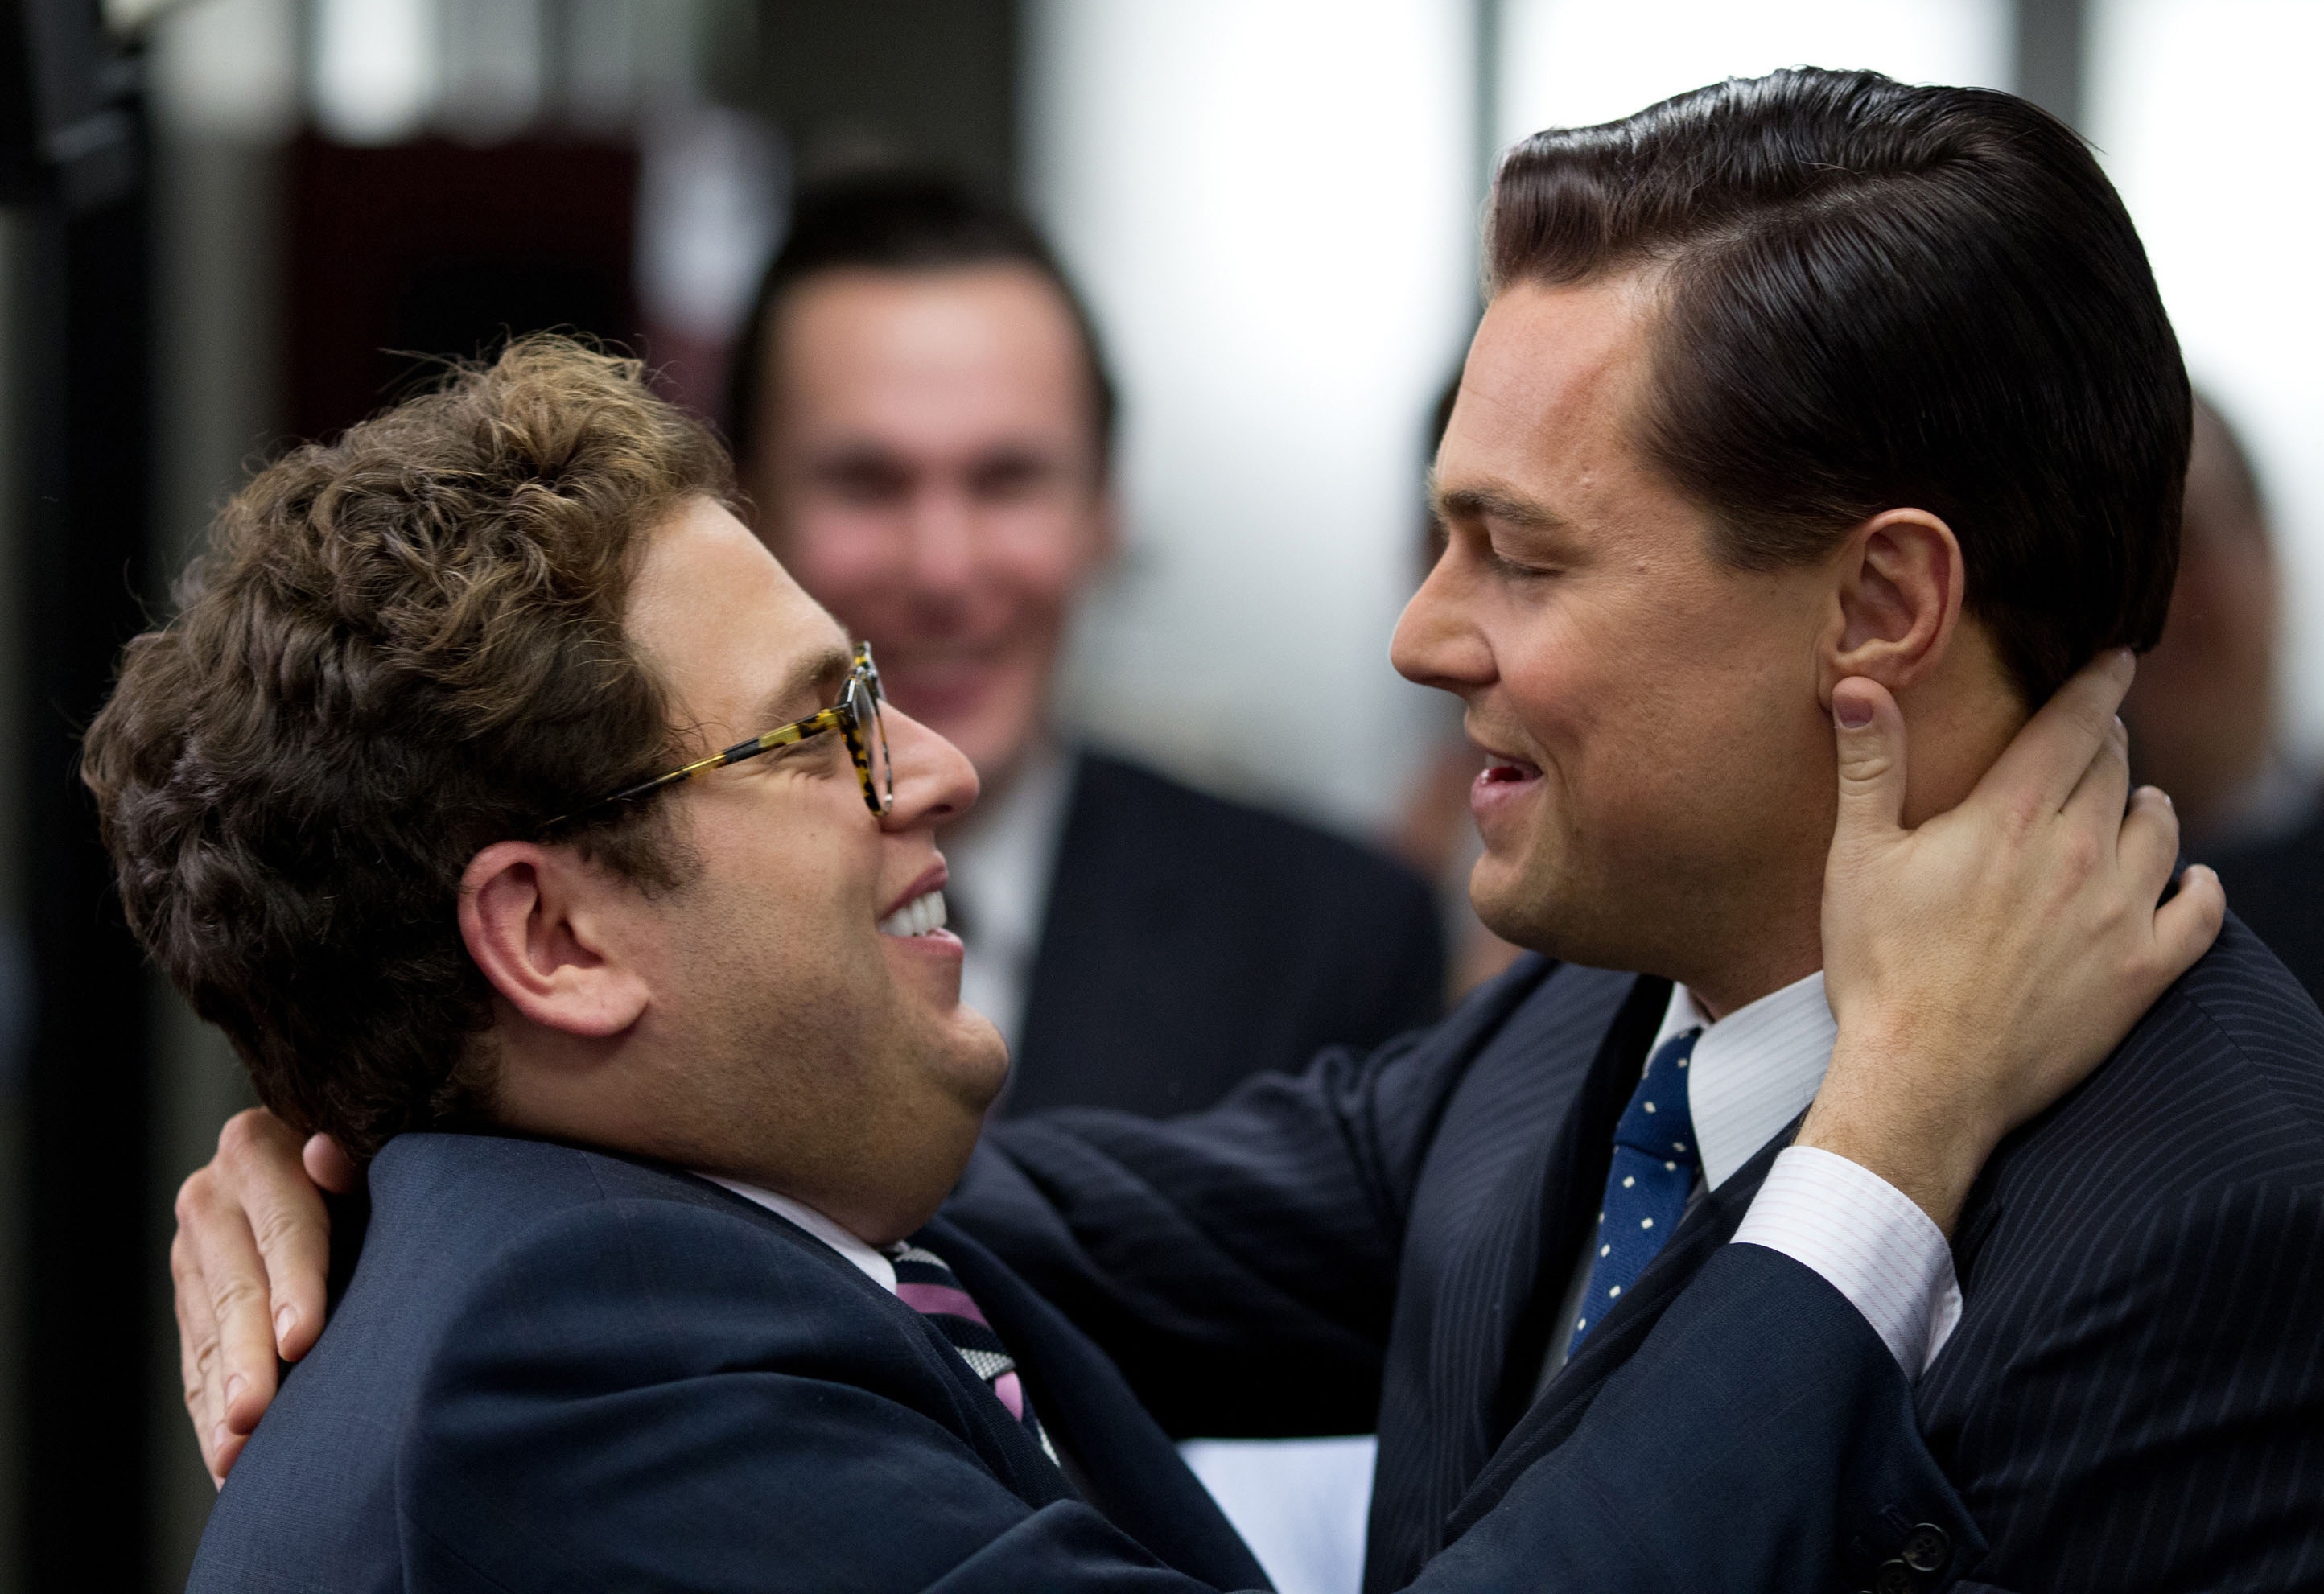 This film image released by Paramount Pictures shows Jonah Hill, left, and Leonardo DiCaprio in a scene from "The Wolf of Wall Street." Hill was nominated for an Academy Award for best supporting actor on Thursday, Jan. 16, 2014, for his role in the film. DiCaprio was also nominated for best actor. The 86th Academy Awards will be held on March 2. (AP Photo/Paramount Pictures and Red Granite Pictures, Mary Cybulski)